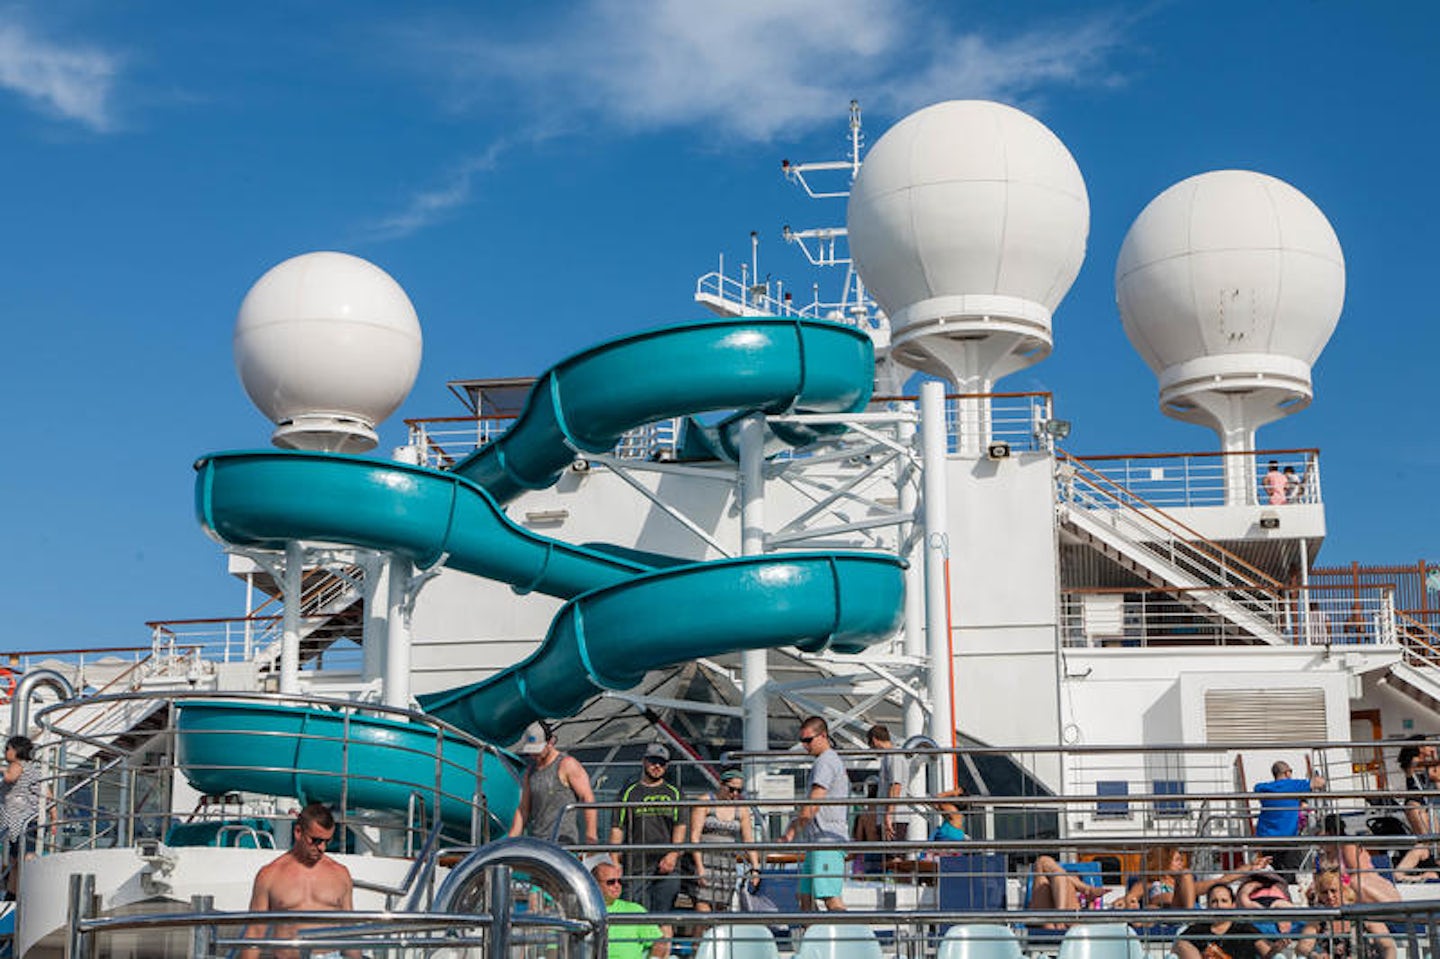 The Twister Waterslide on Carnival Valor